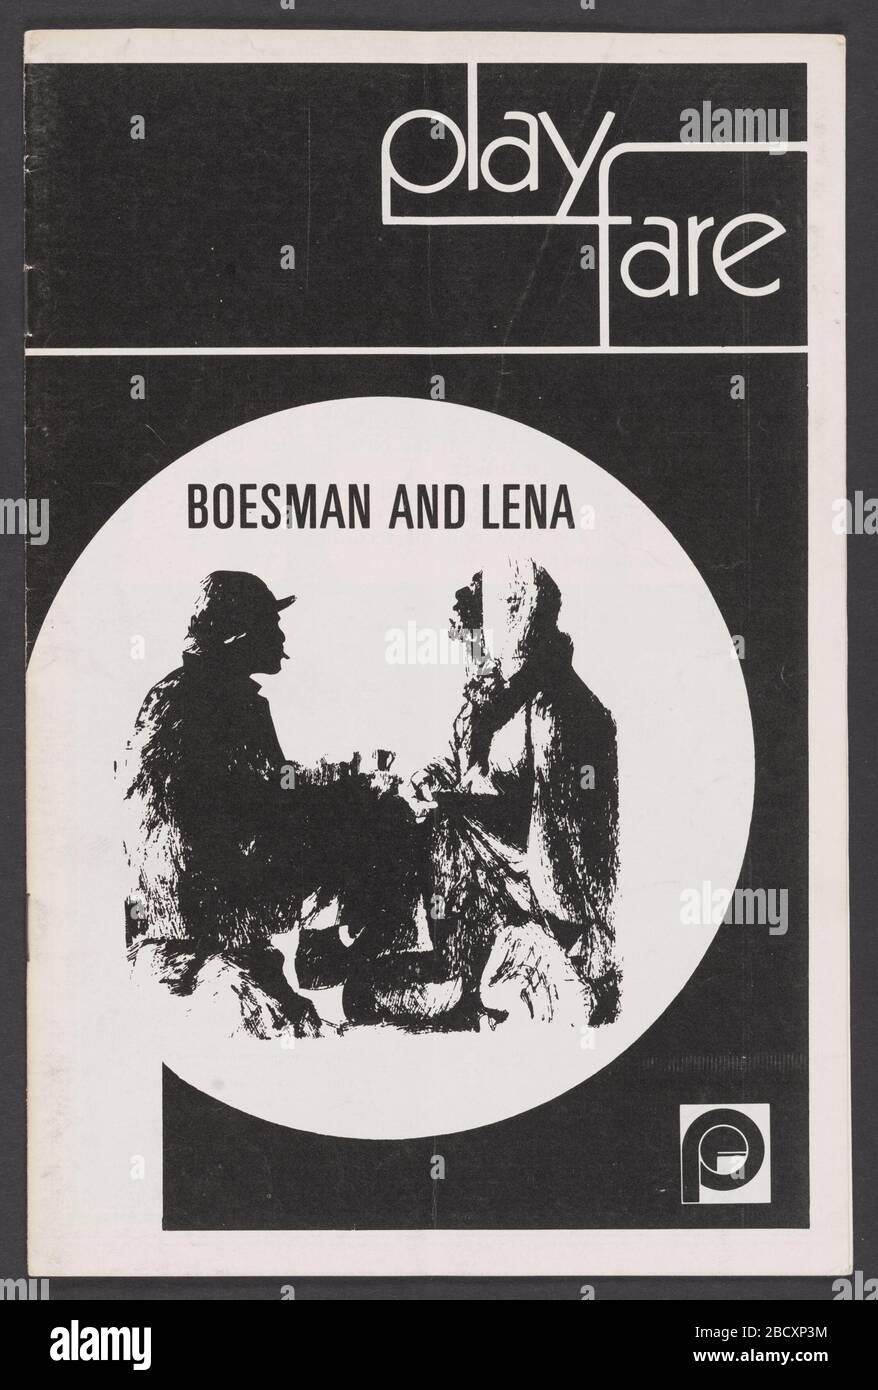 Theatre program for Boesman and Lena. Theater program for Boesman and Lena directed by John Berry. Black and white with drawing of two people sitting and facing each other. White circular sticker on back, handwritten 1970. [play/fare/BOESMAN AND LENA] Theatre program for Boesman and Lena Stock Photo